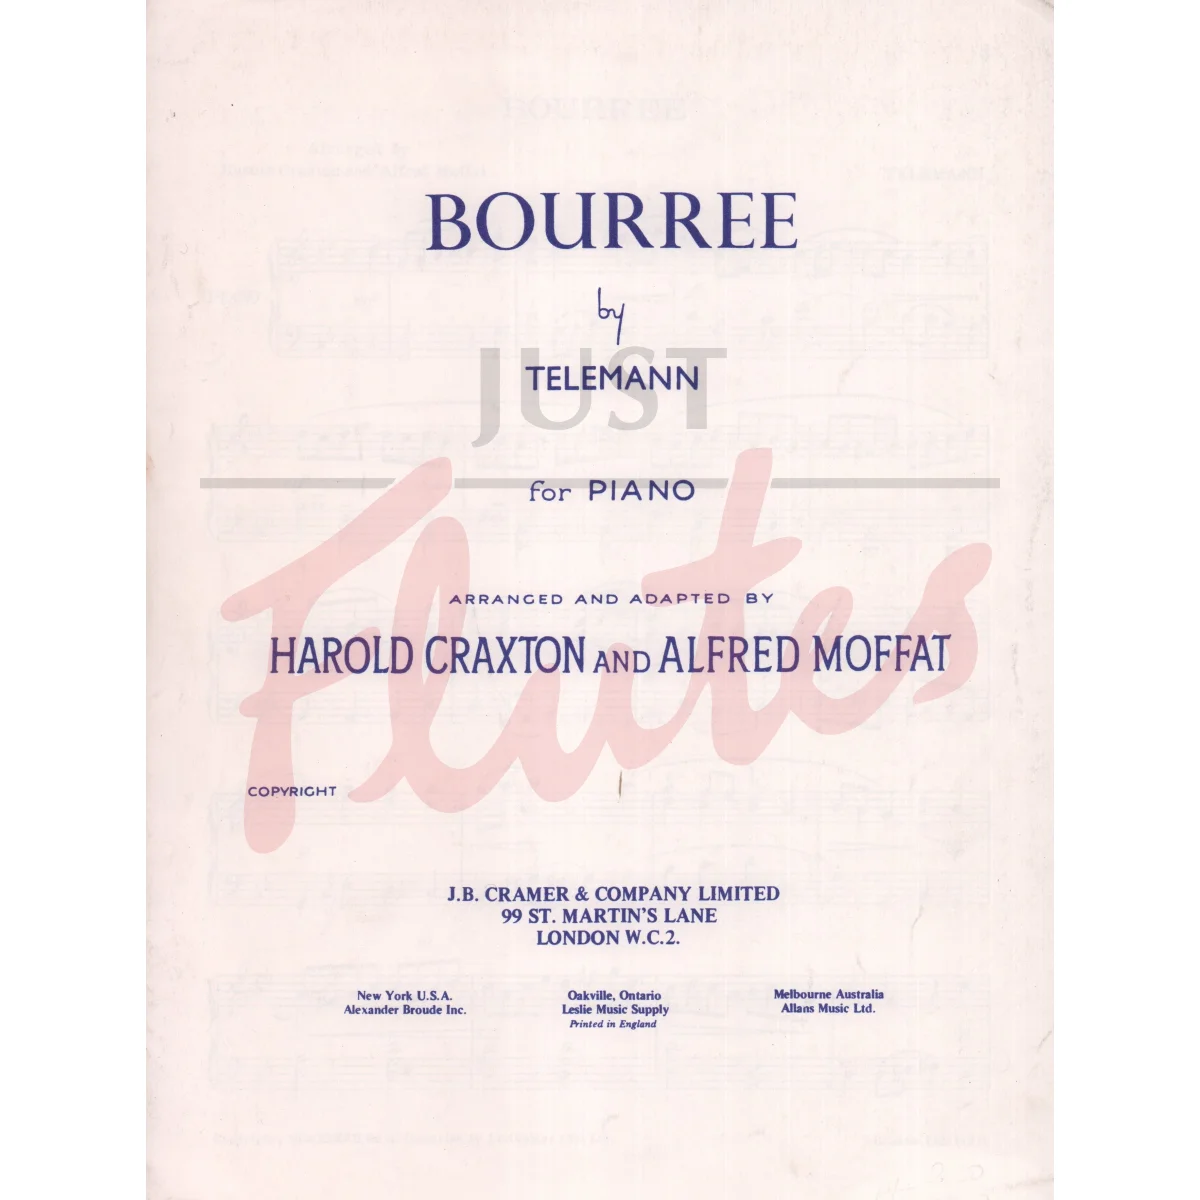 Bourree for Piano